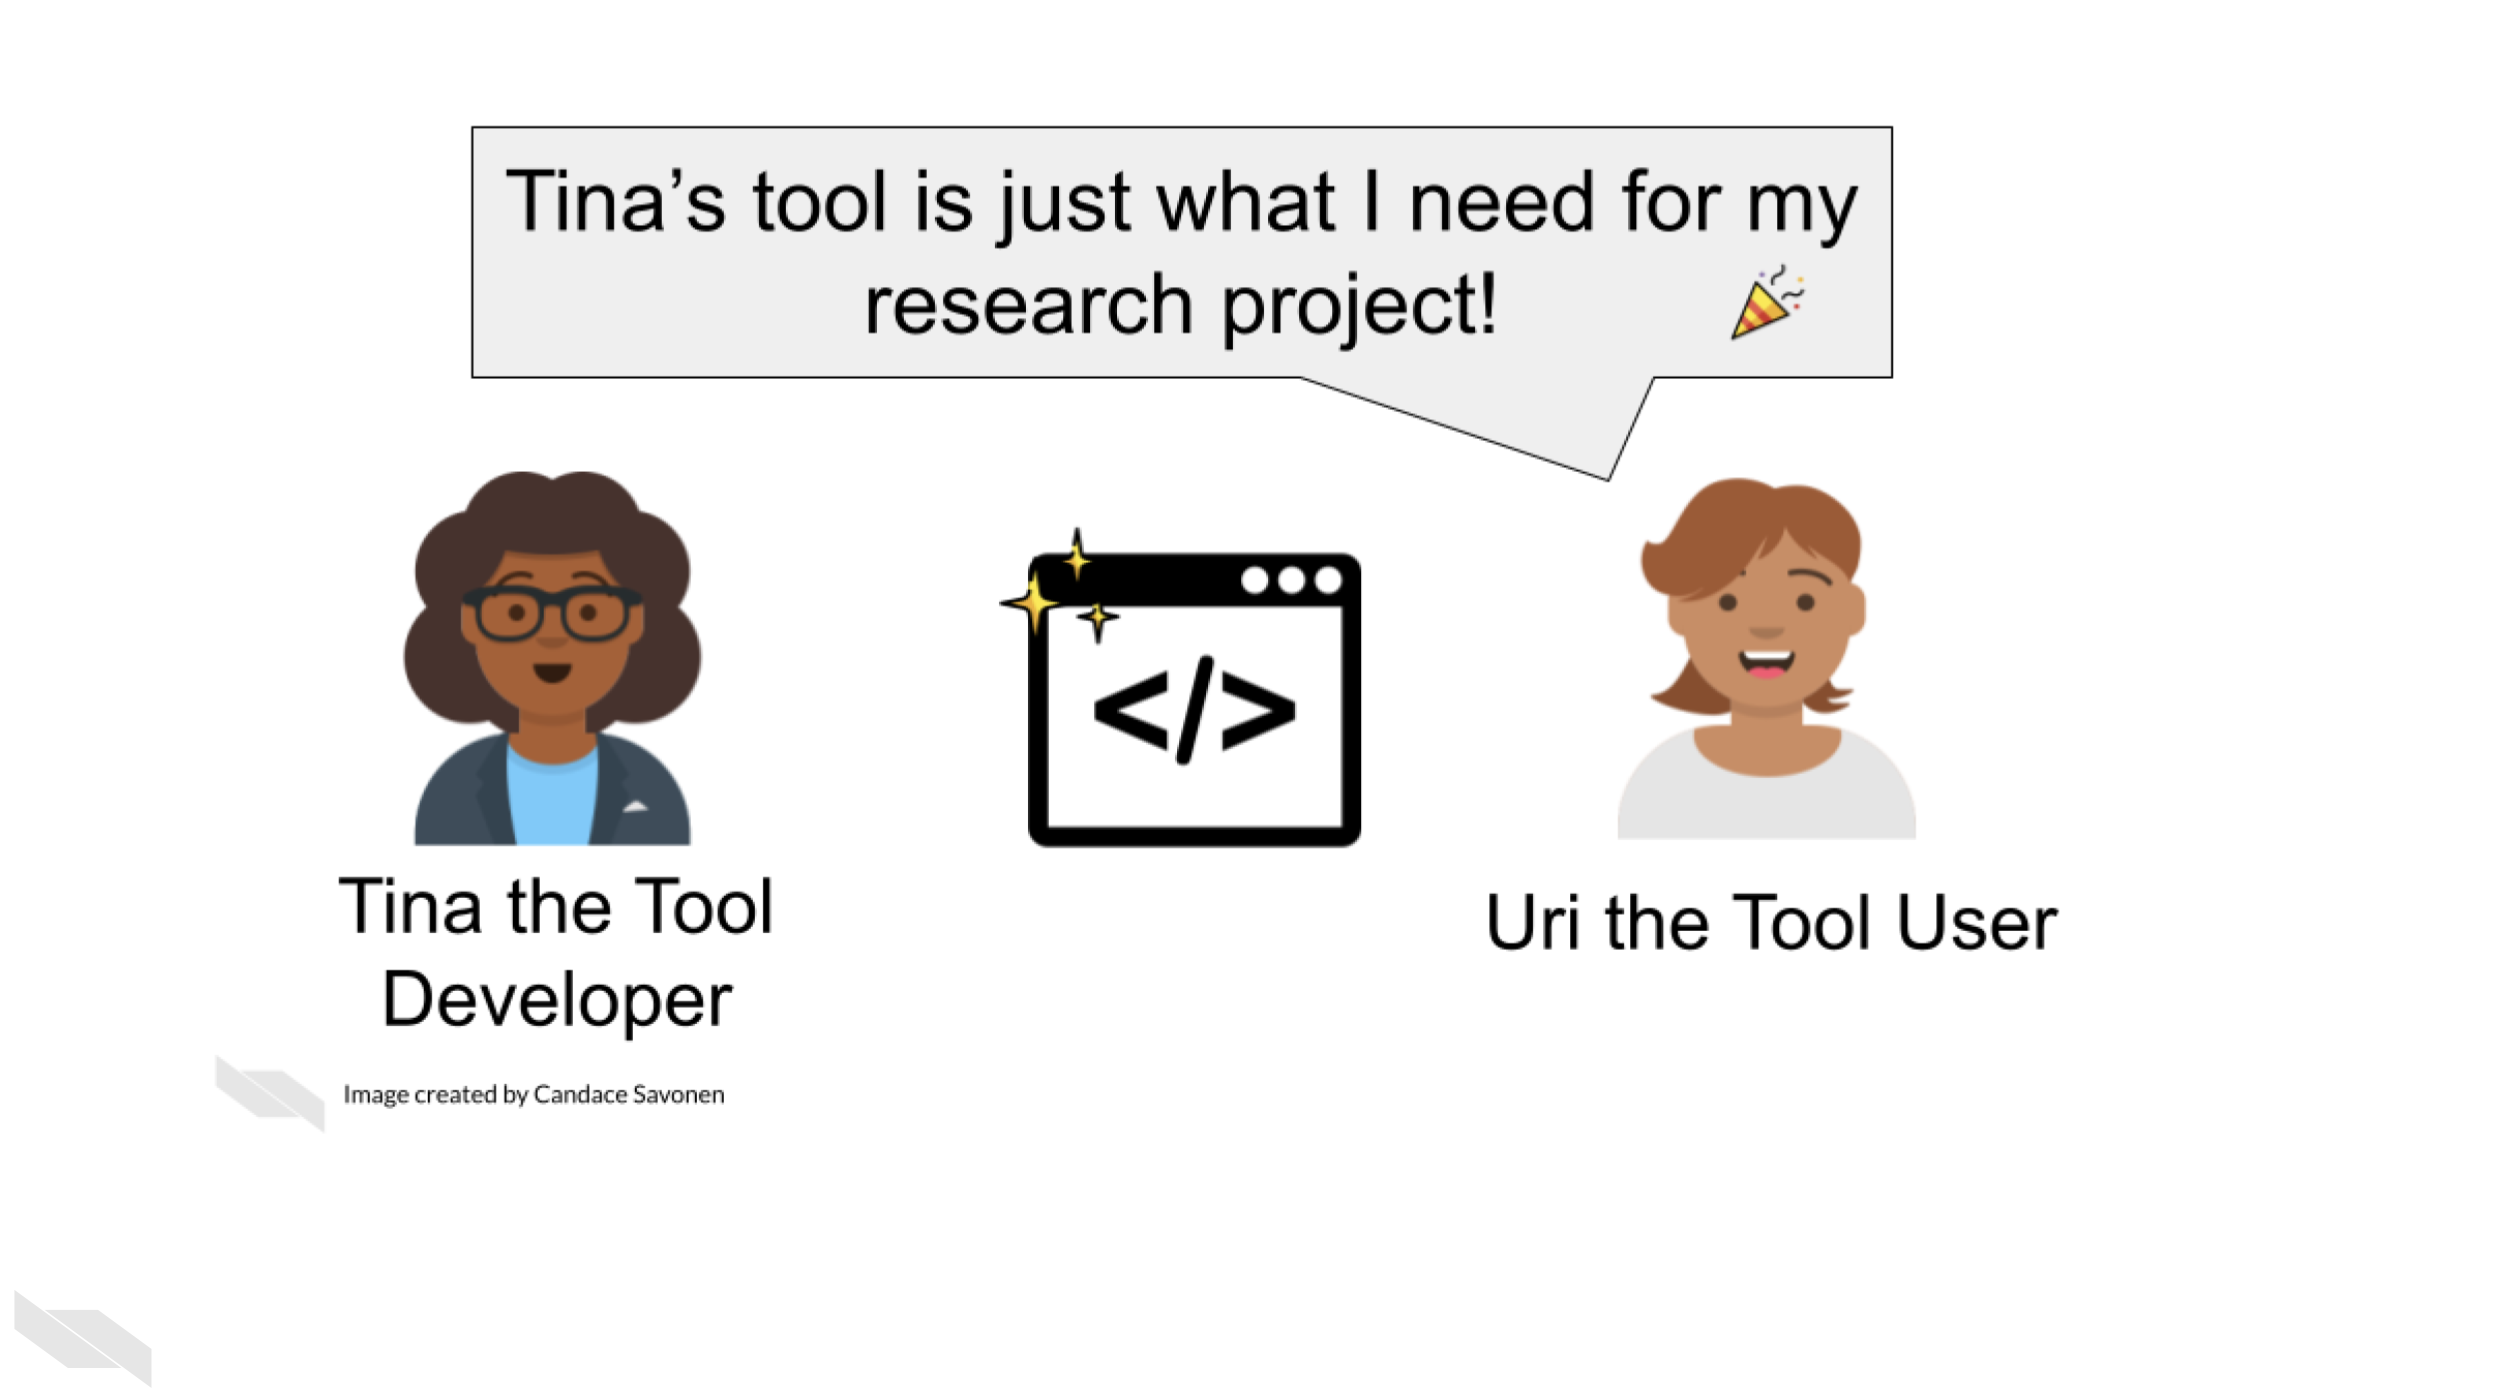 Upon finding Tina the Tool Developer’s awesome tool, Uri the Tool User says Tina’s tool is just what I need for my research project!